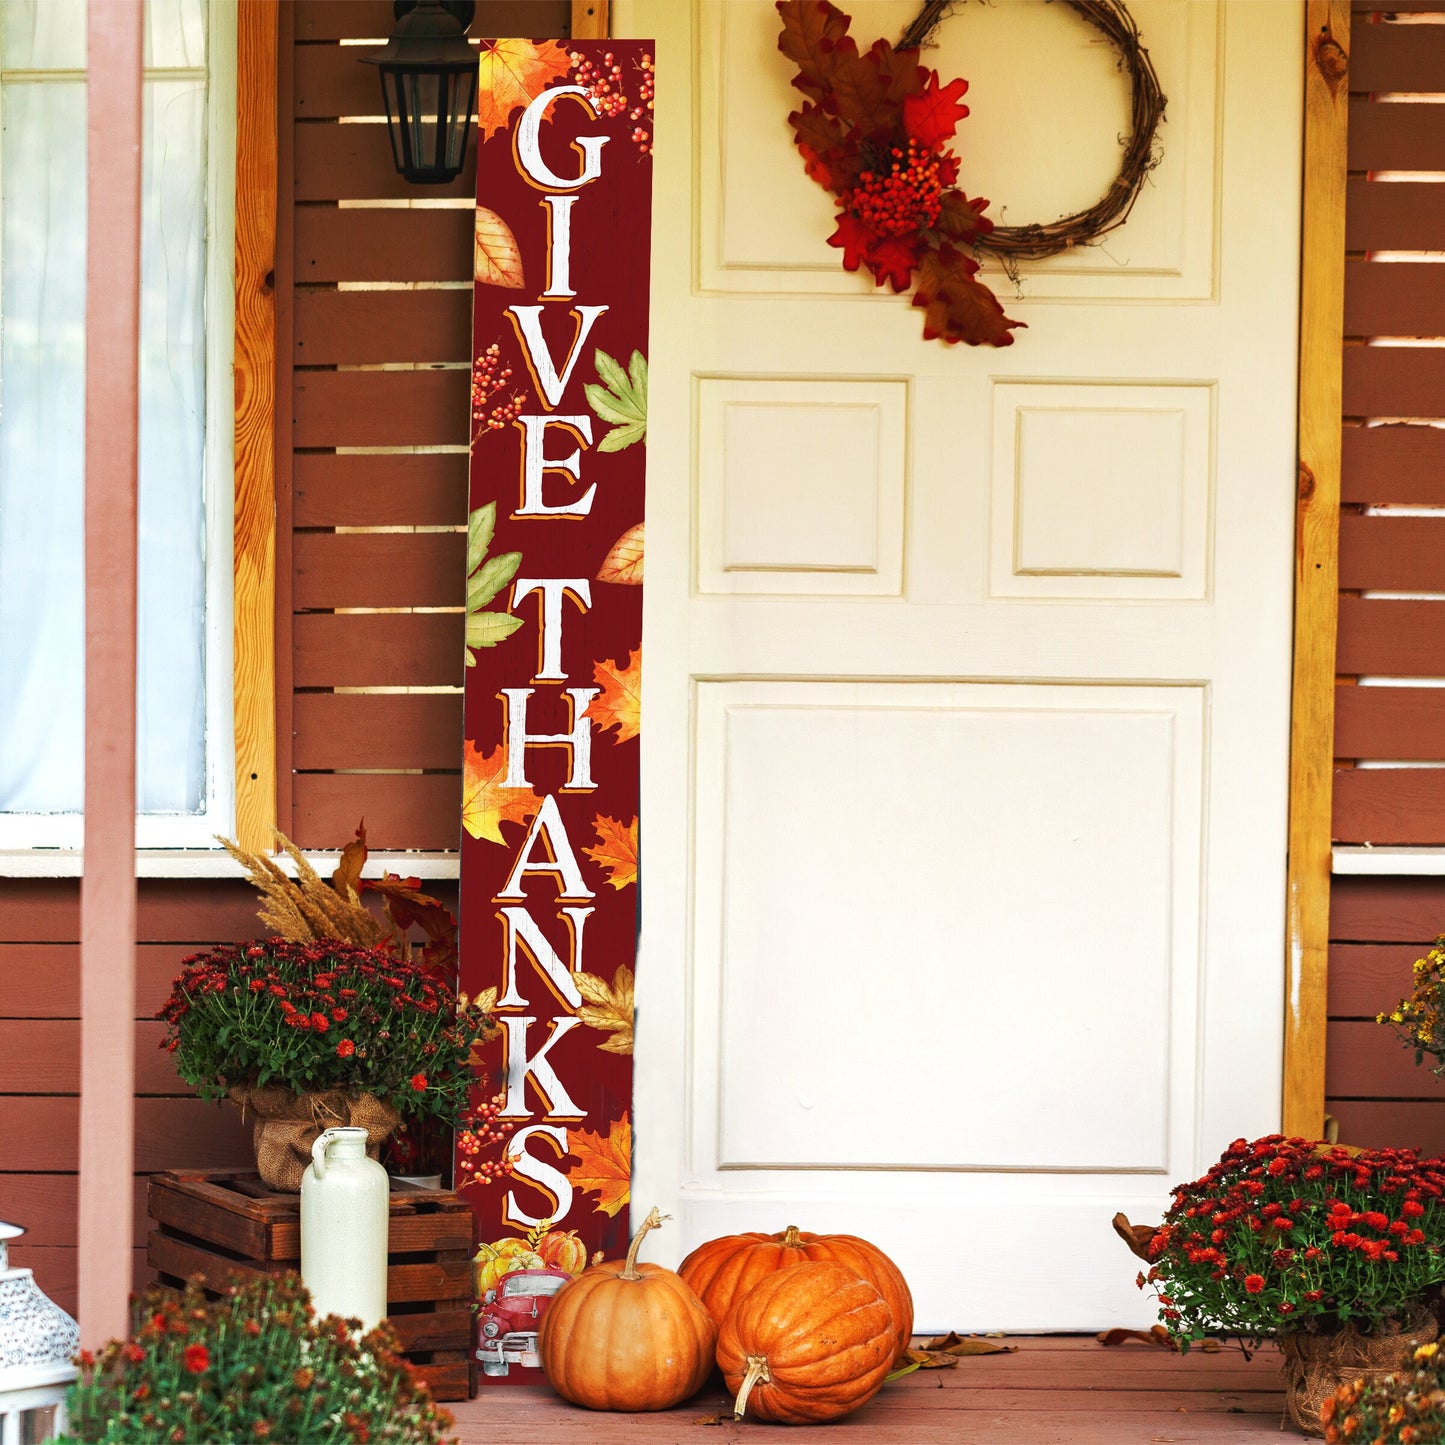 72in "Give Thanks" Fall Porch Sign | Front Door Autumn Decor | Thanksgiving Celebration | Ideal for Entryway, Living Room, Porch Decor